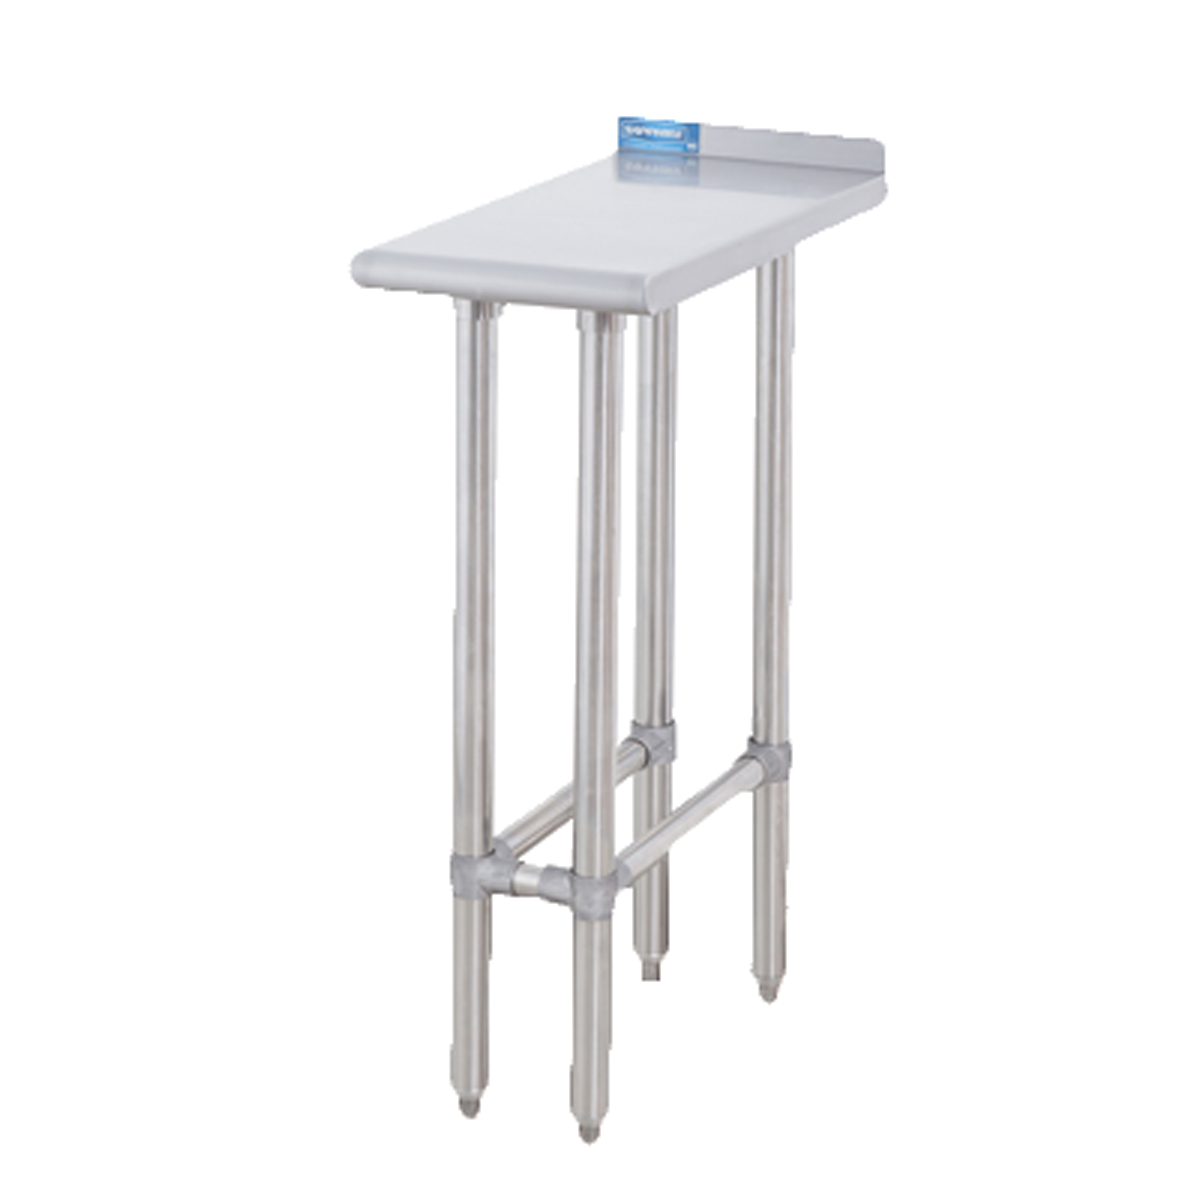 Sapphire SMEFT-3018 Equipment Filler Table with Stainless Steel Top, 18"W x 30"D